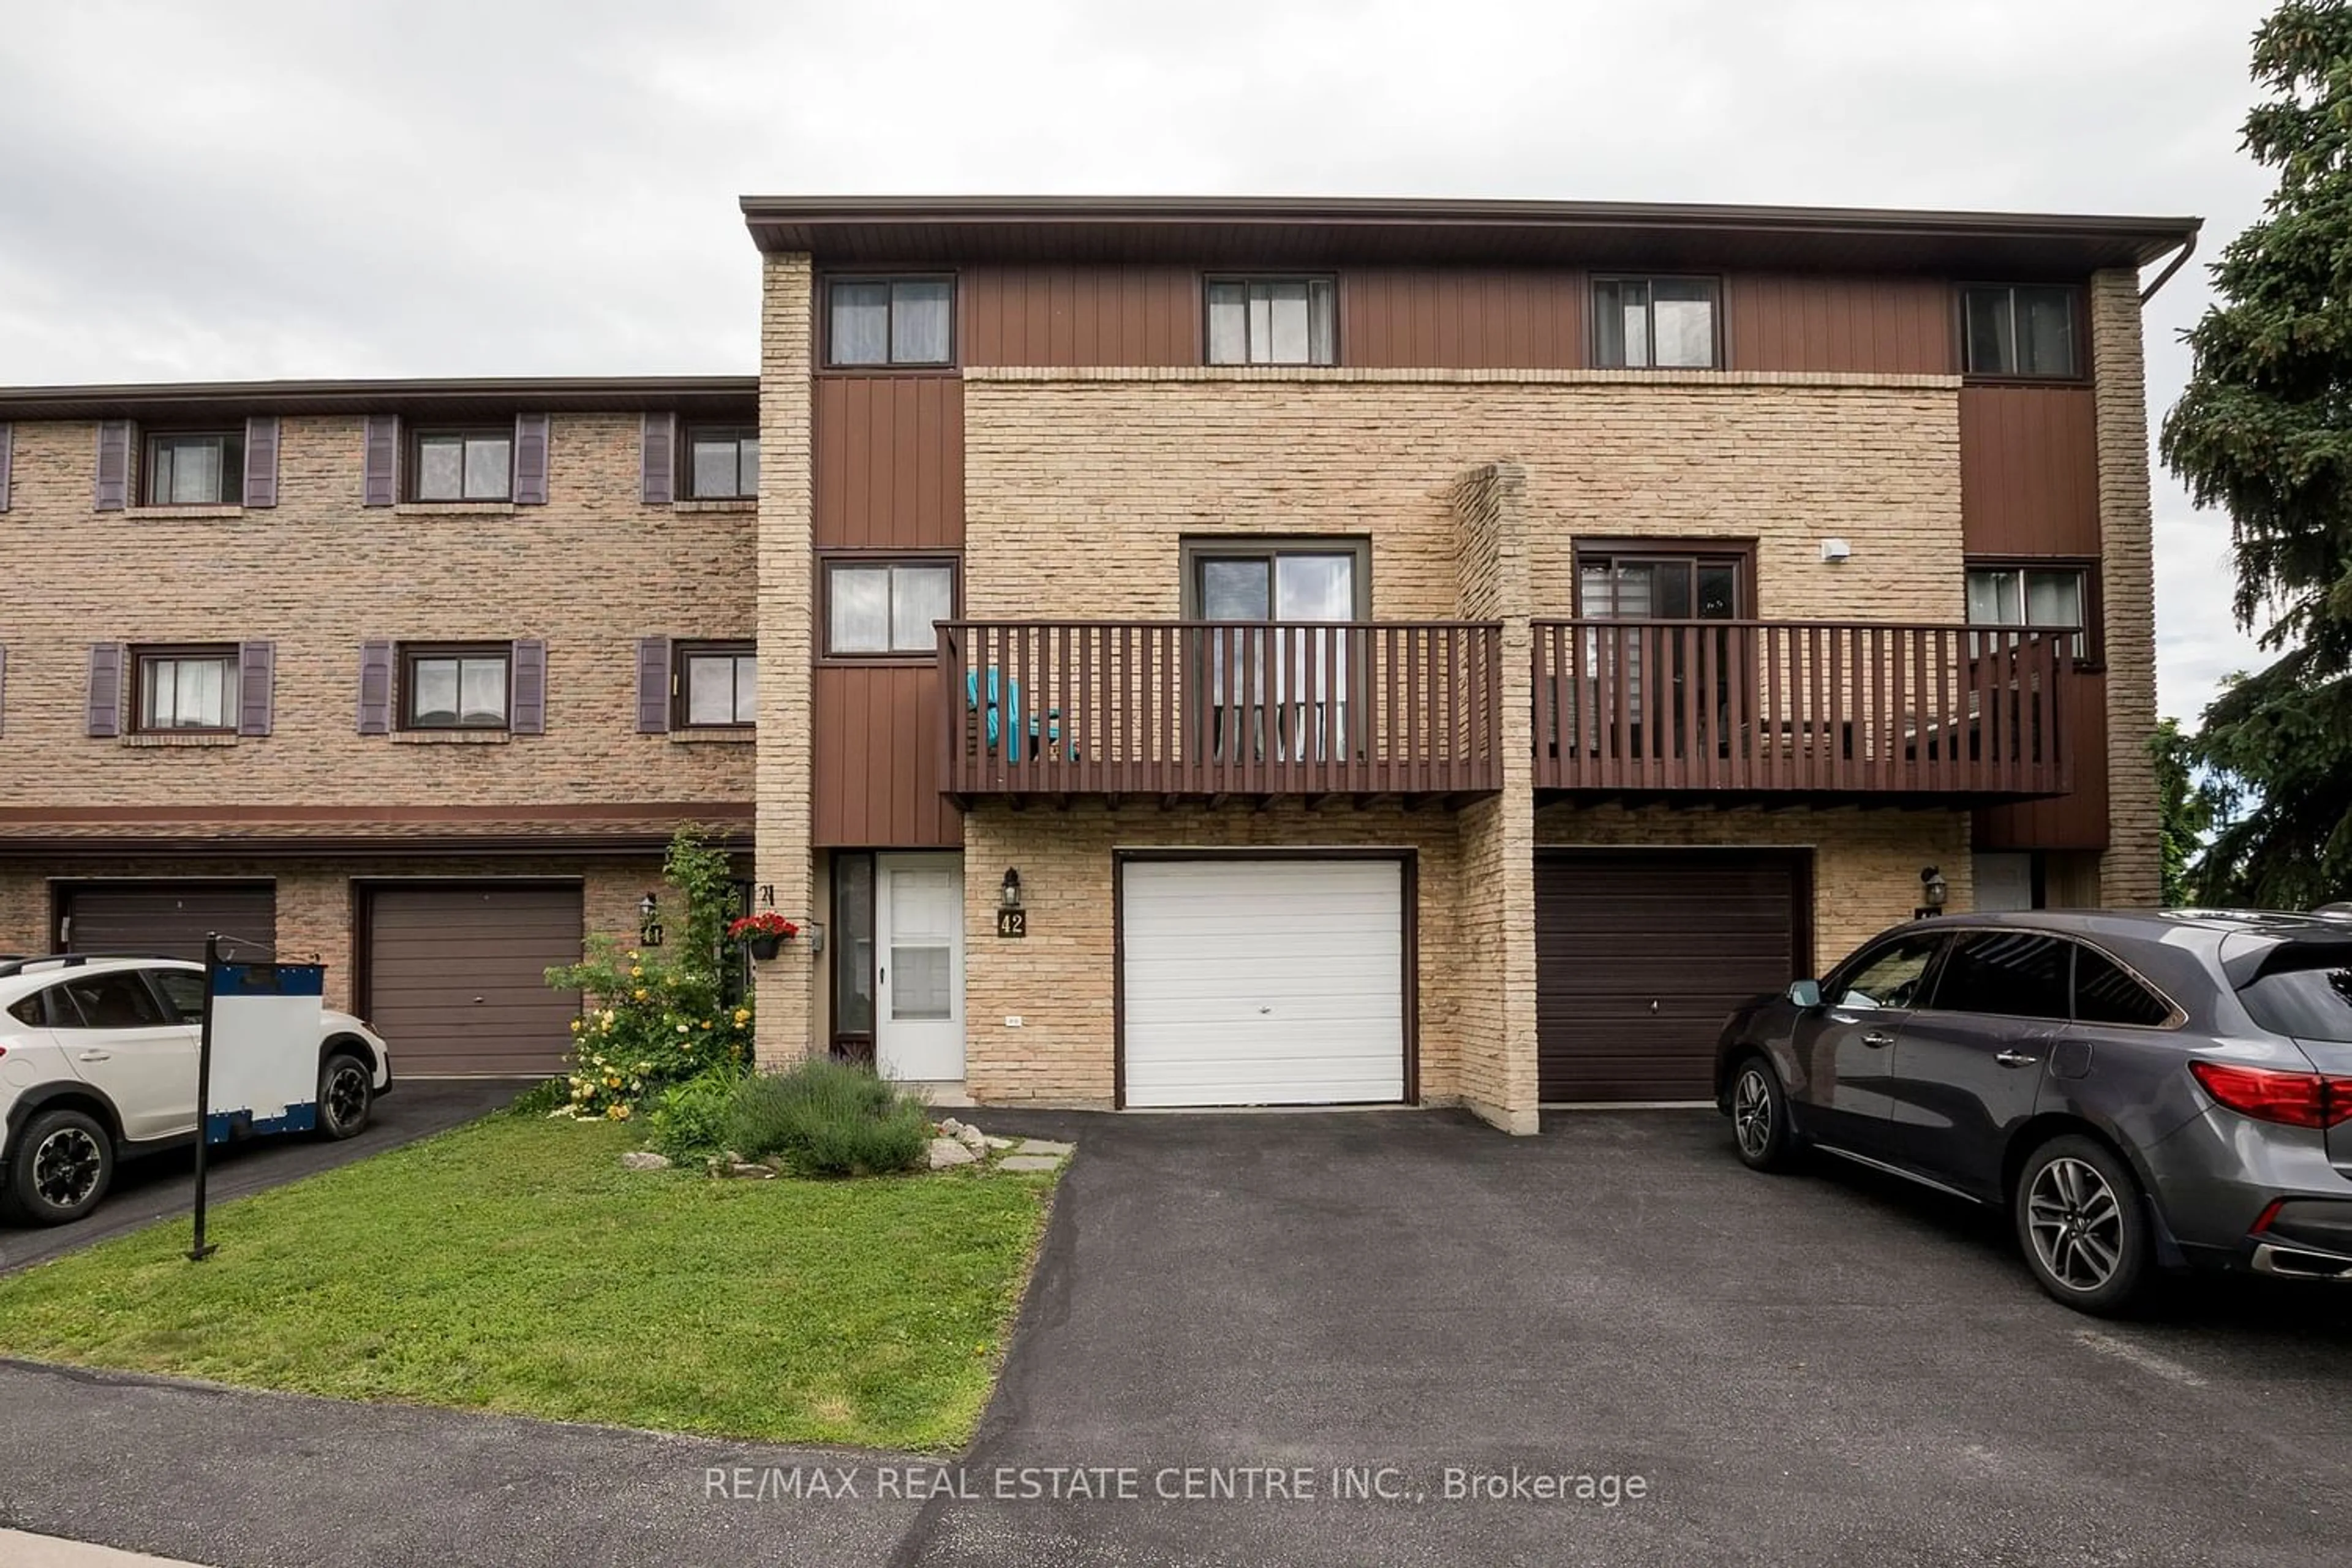 A pic from exterior of the house or condo for 1250 Limeridge Rd #42, Hamilton Ontario L8W 1P1